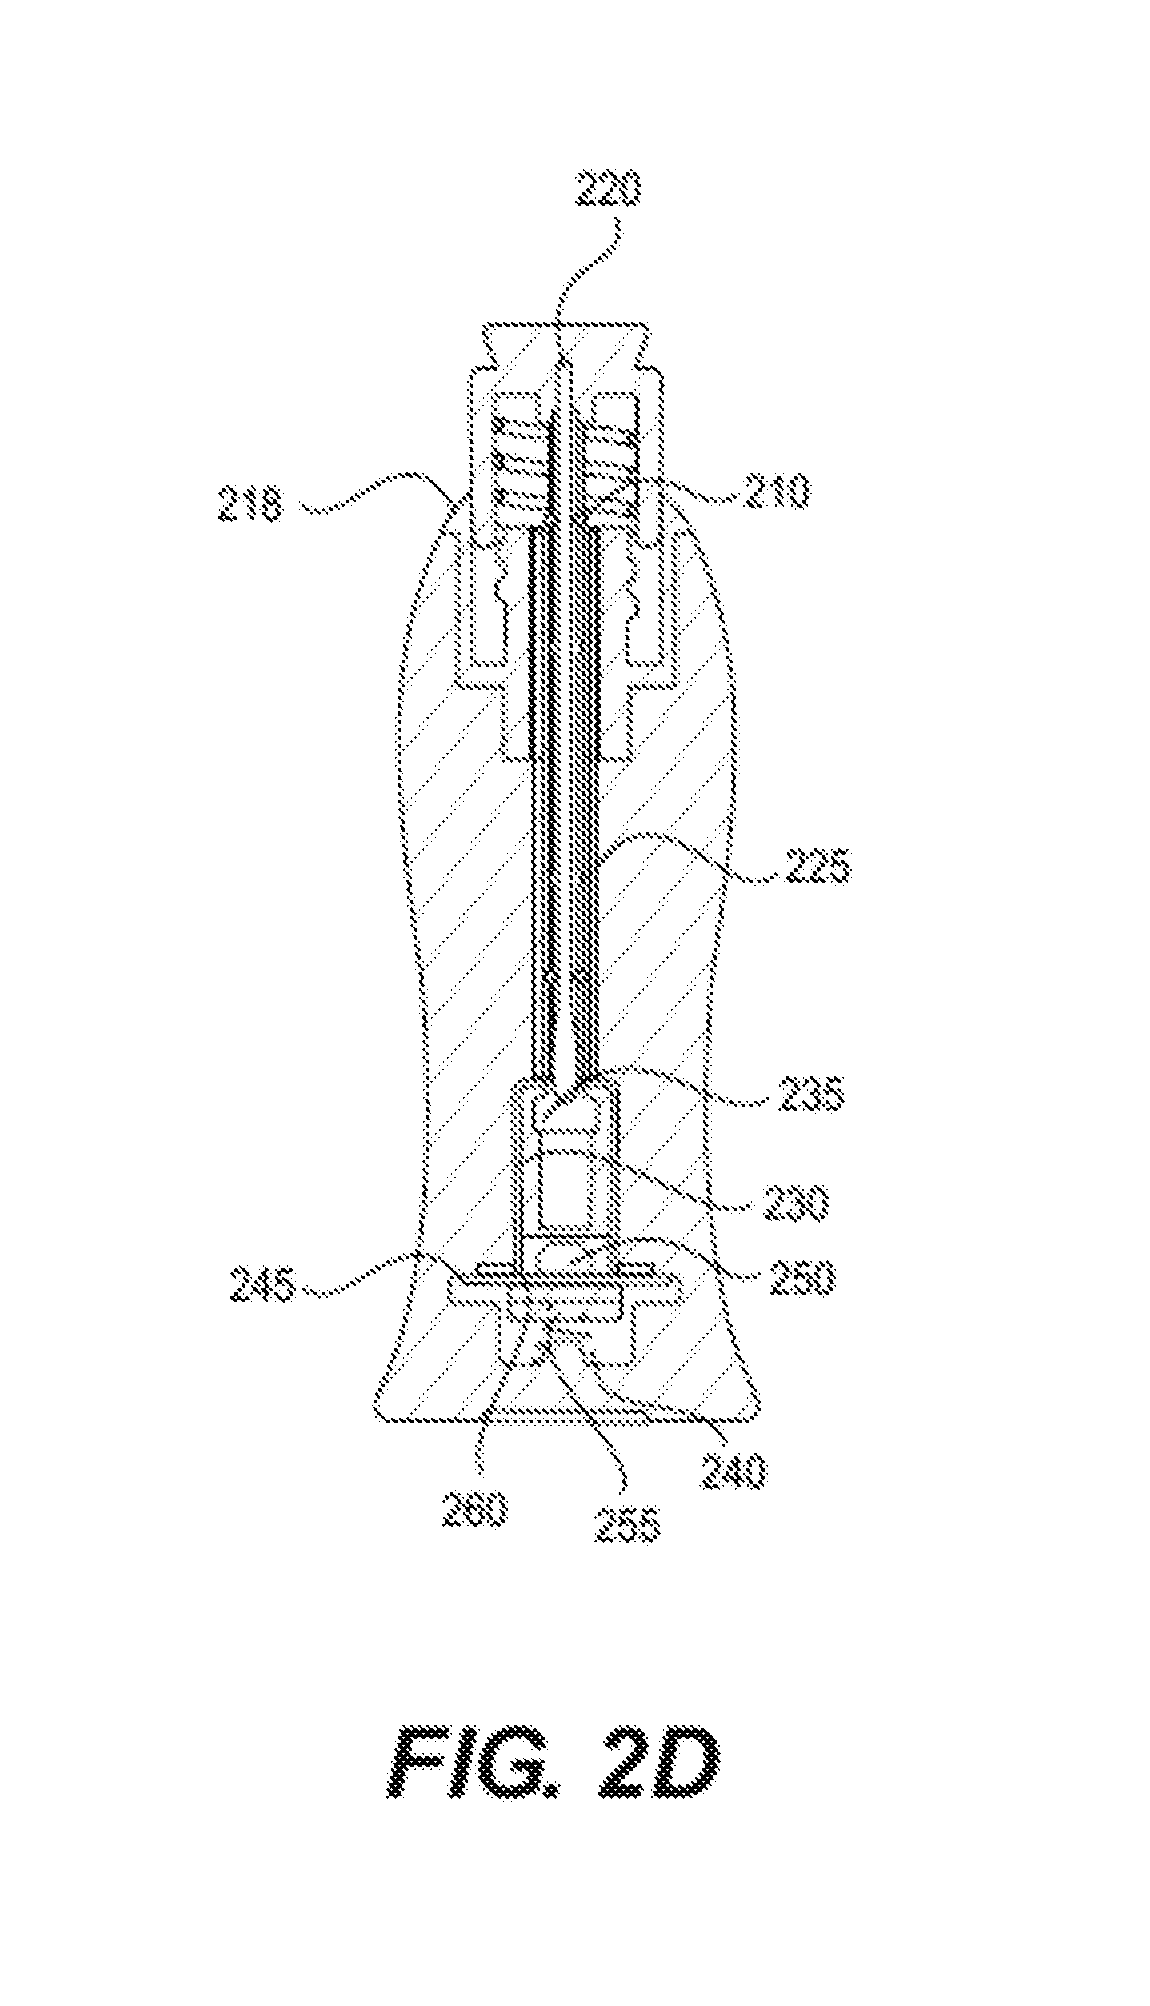 Portable disposable re-usable culture device for rapid diagnosis of infectious agents